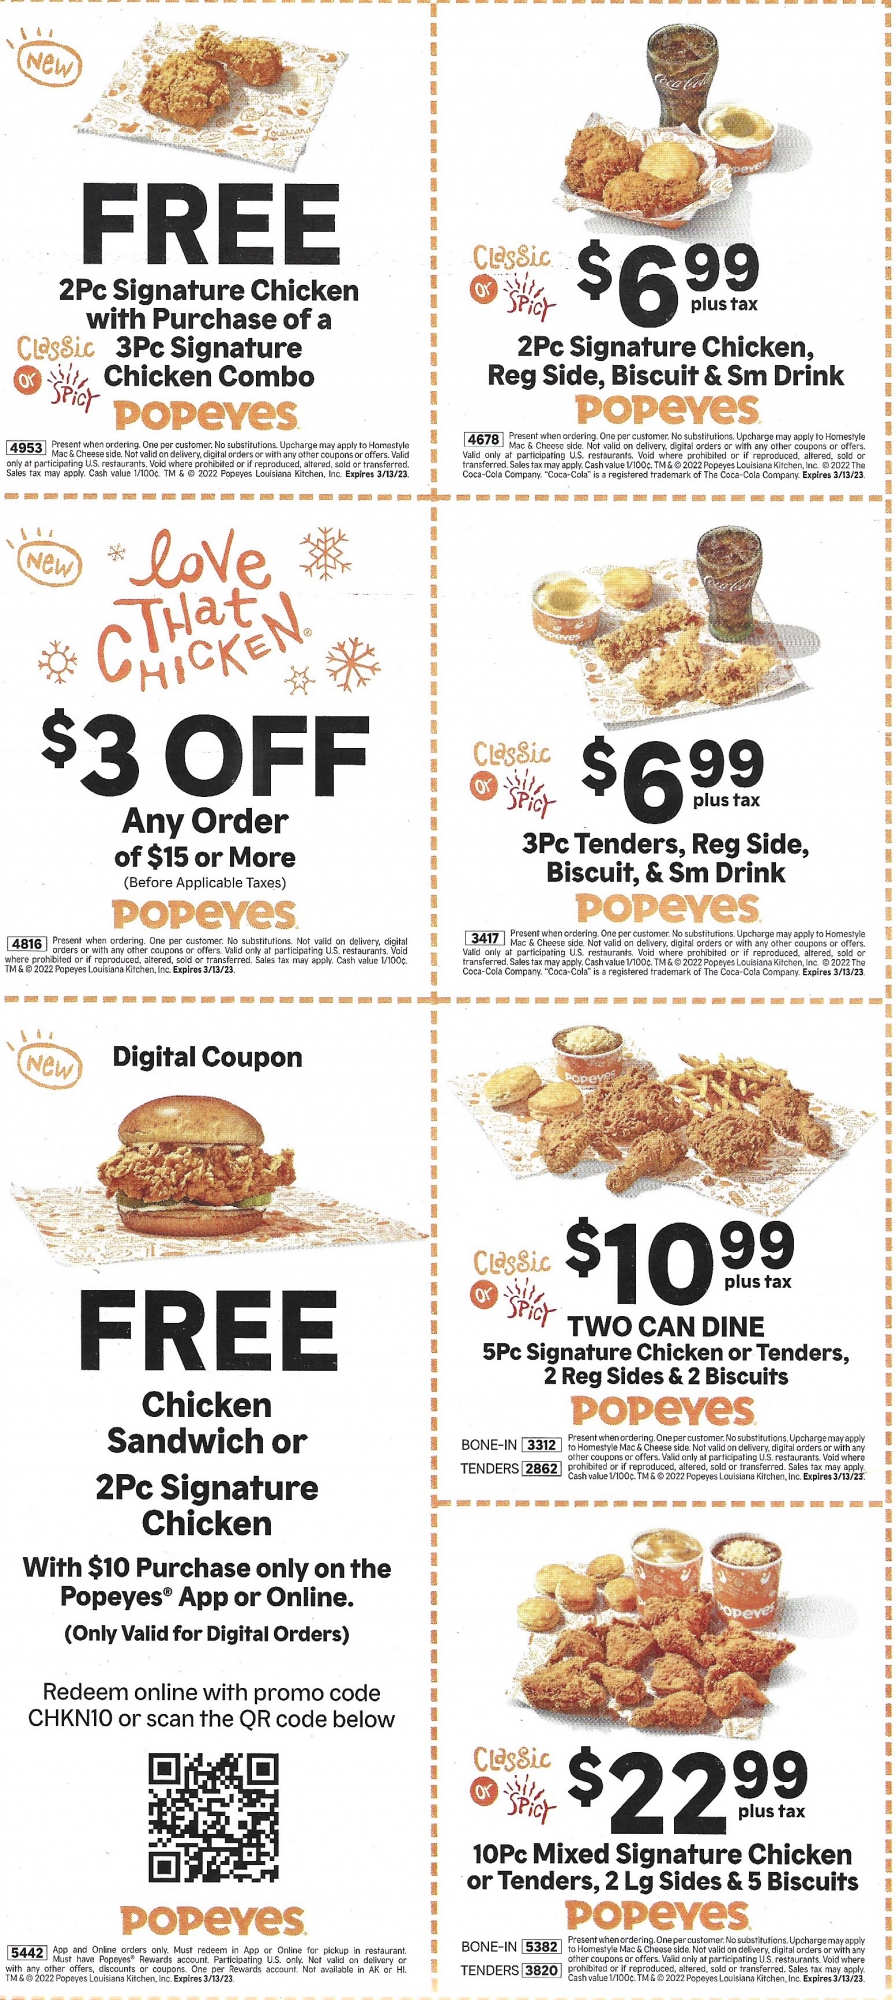 Popeyes Chicago Deals Coupons December 2022 - Expires 3/13/23